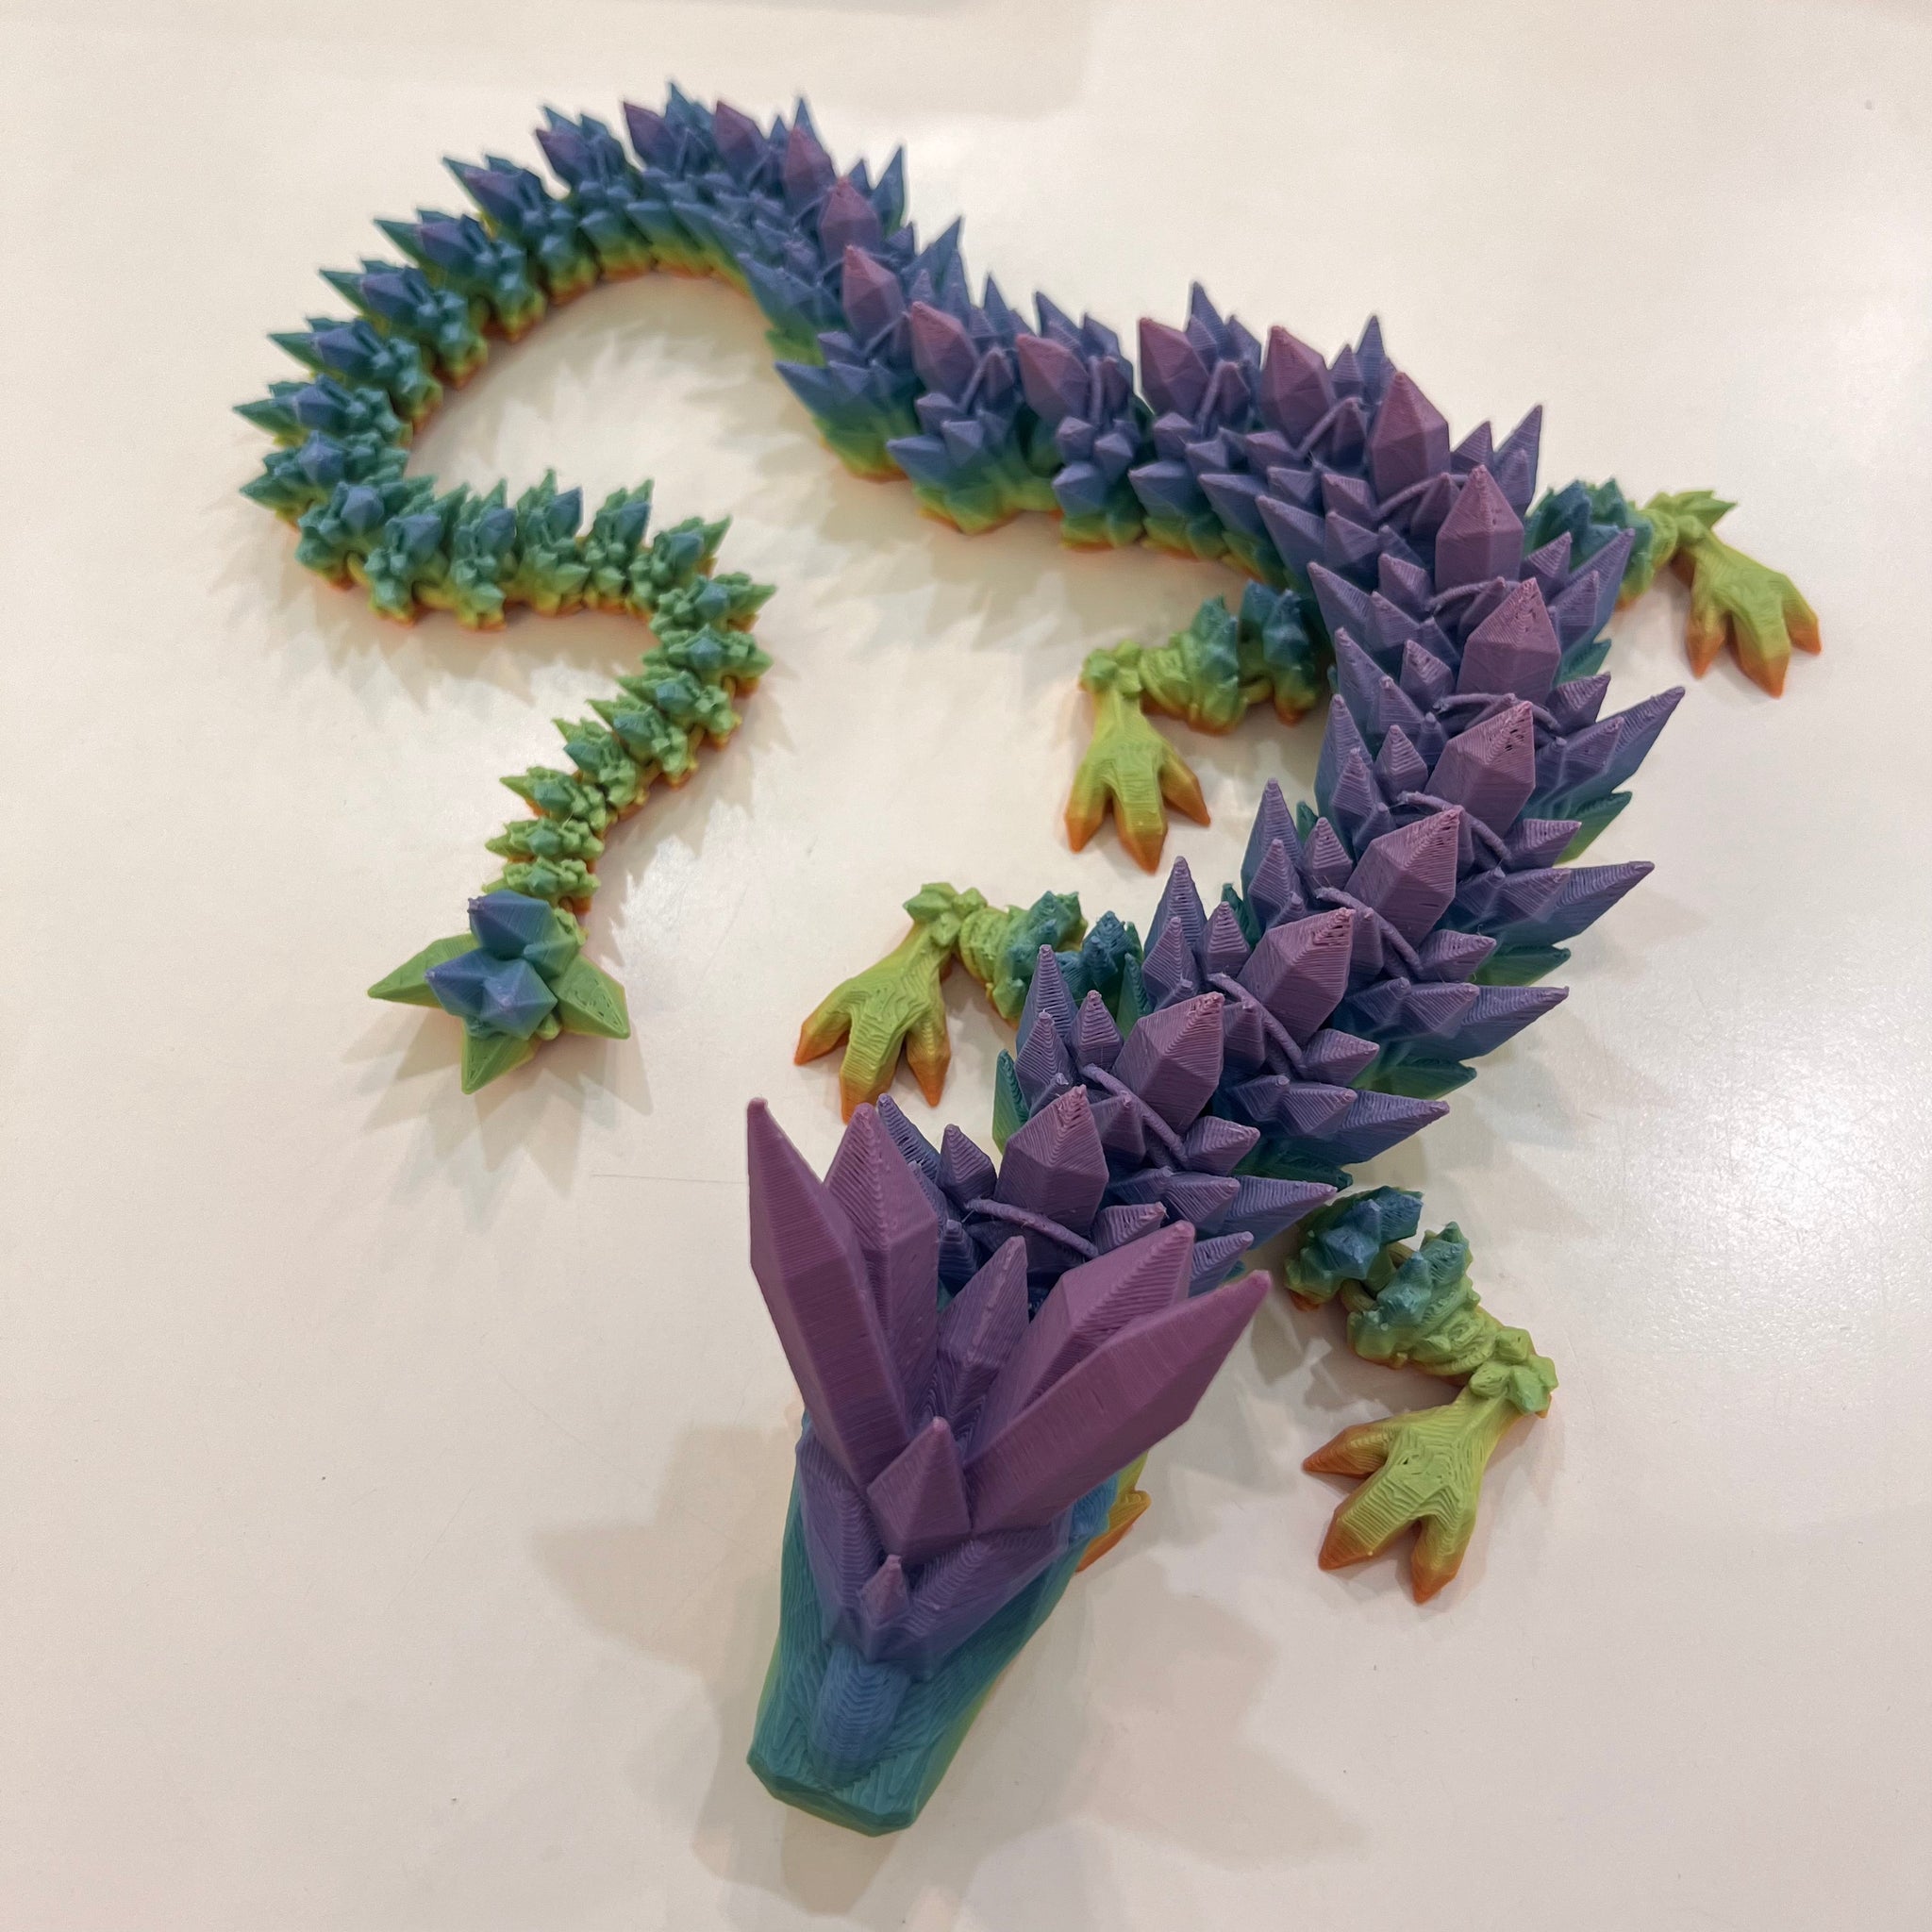 3D Printed Multi Colored Crystal Dragon